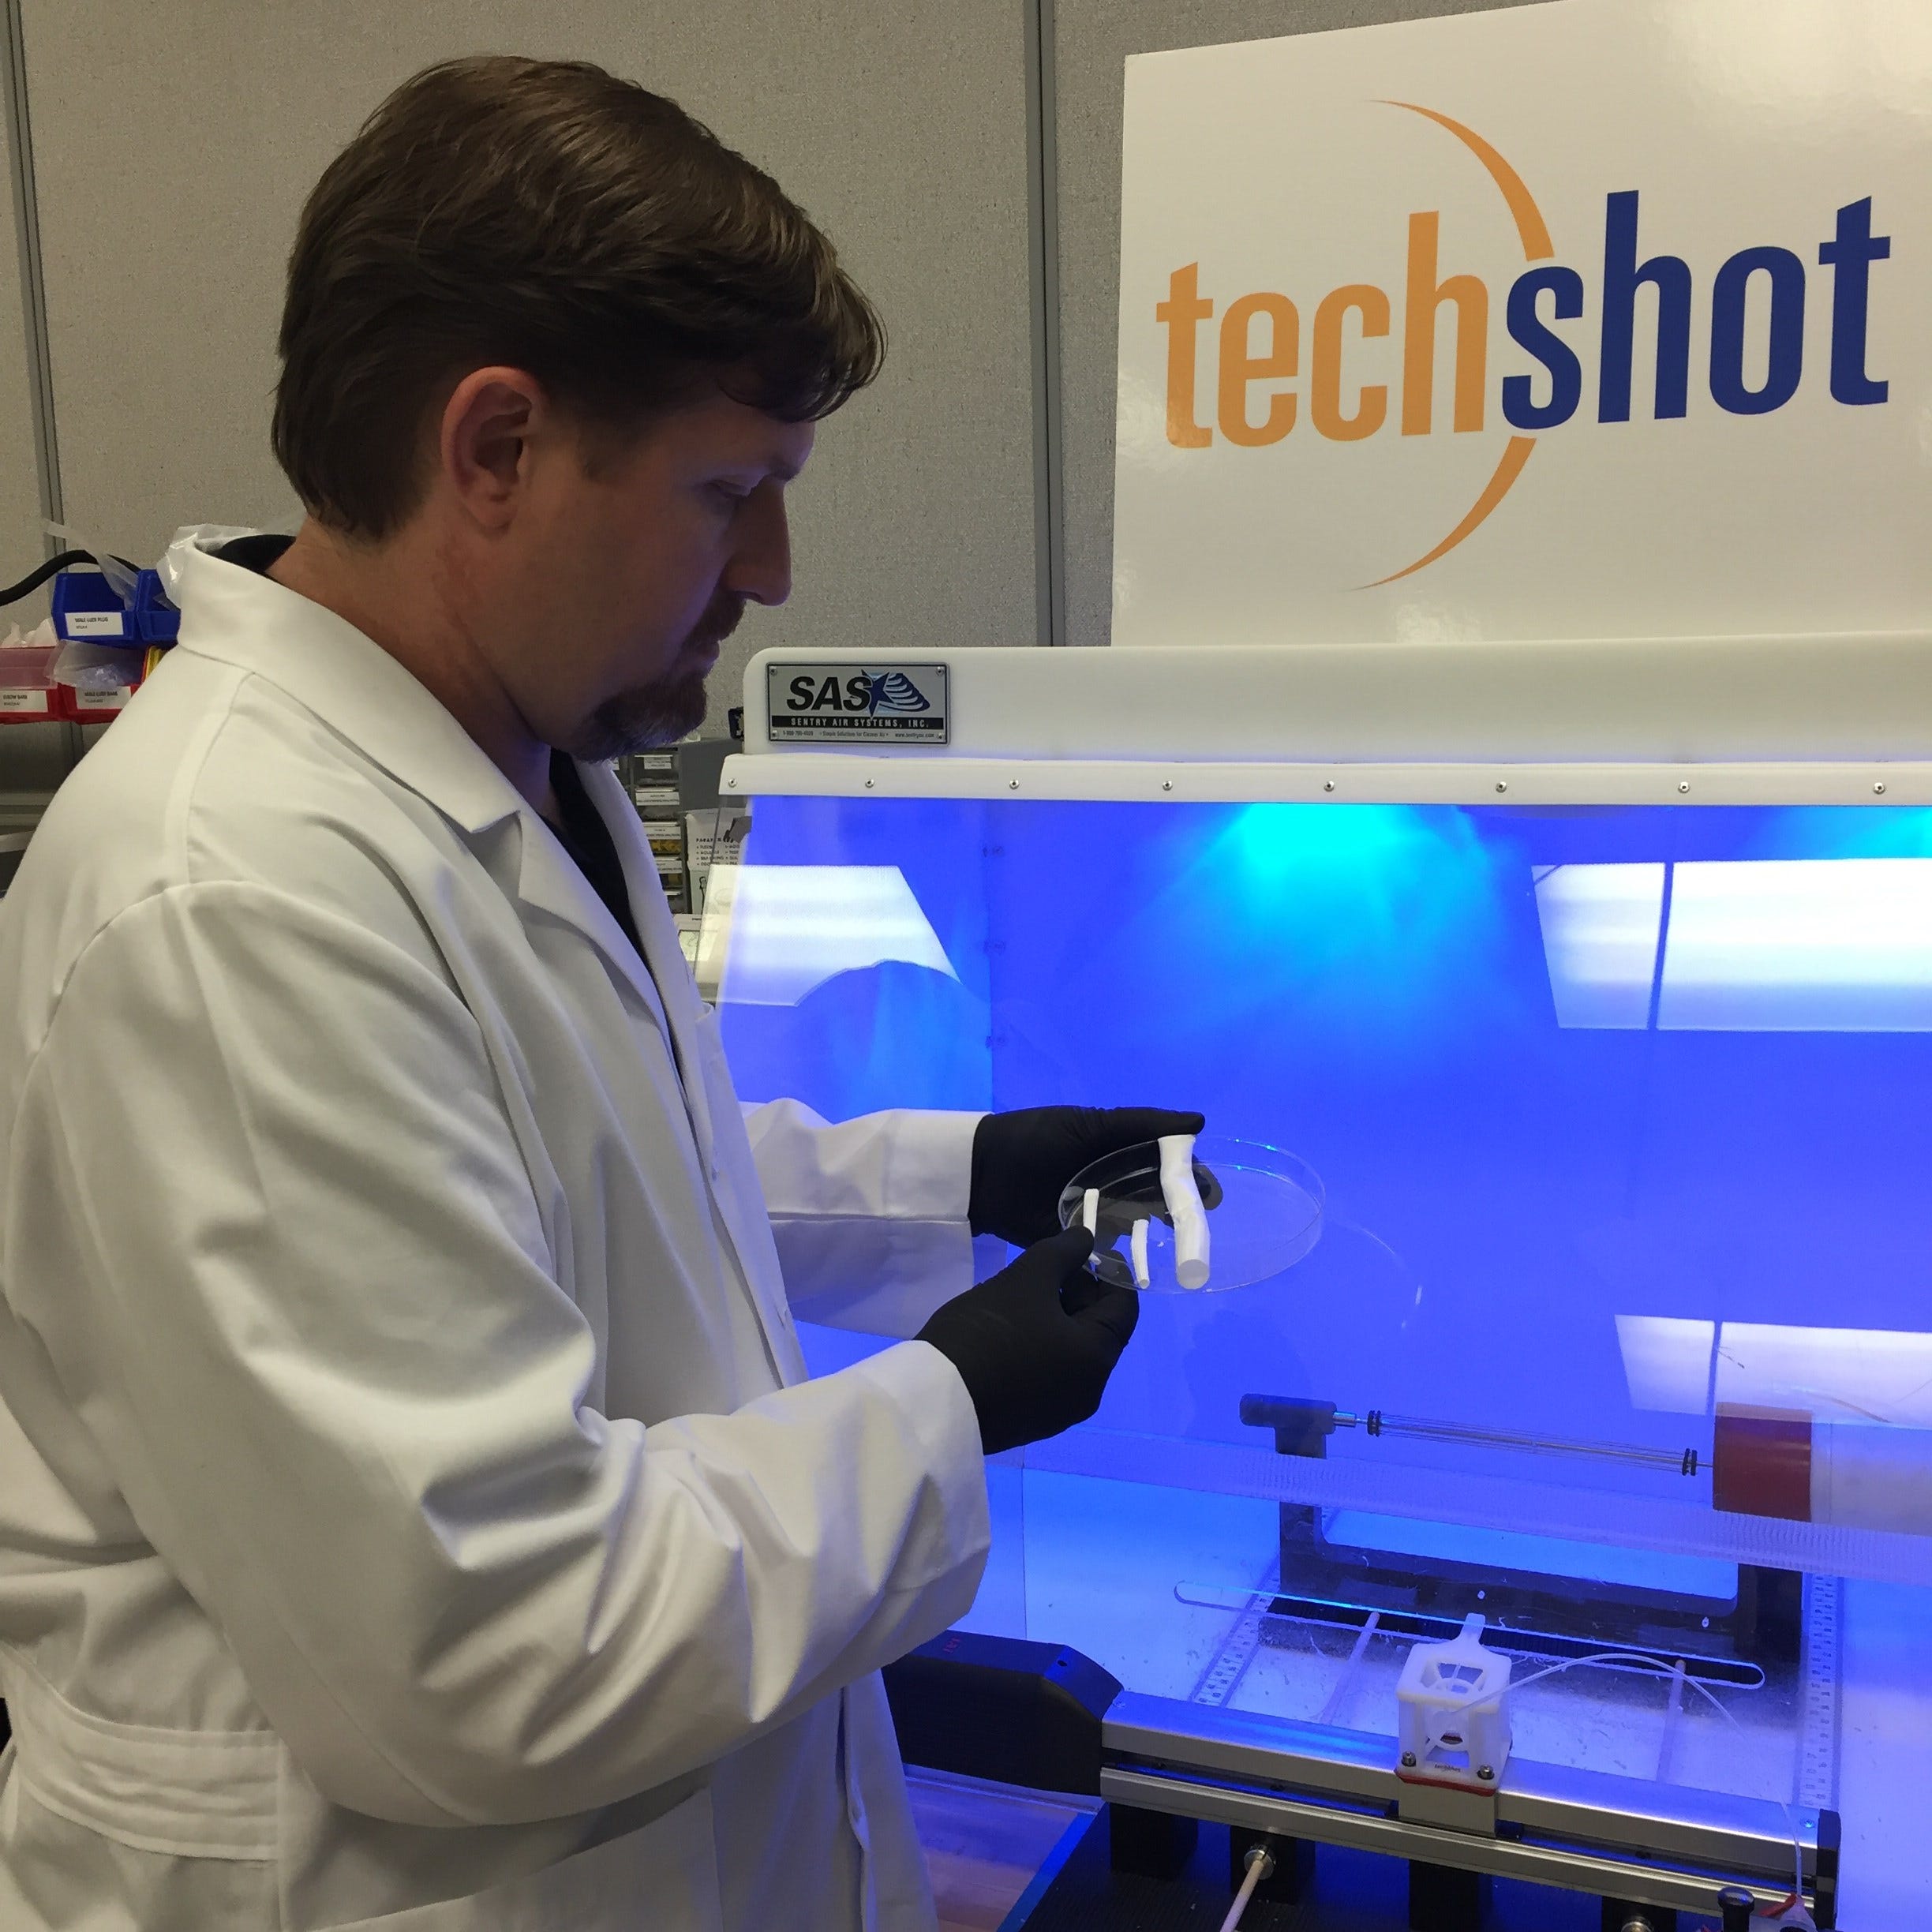 Techshot Builds Blood Vessels for Wounded Warriors